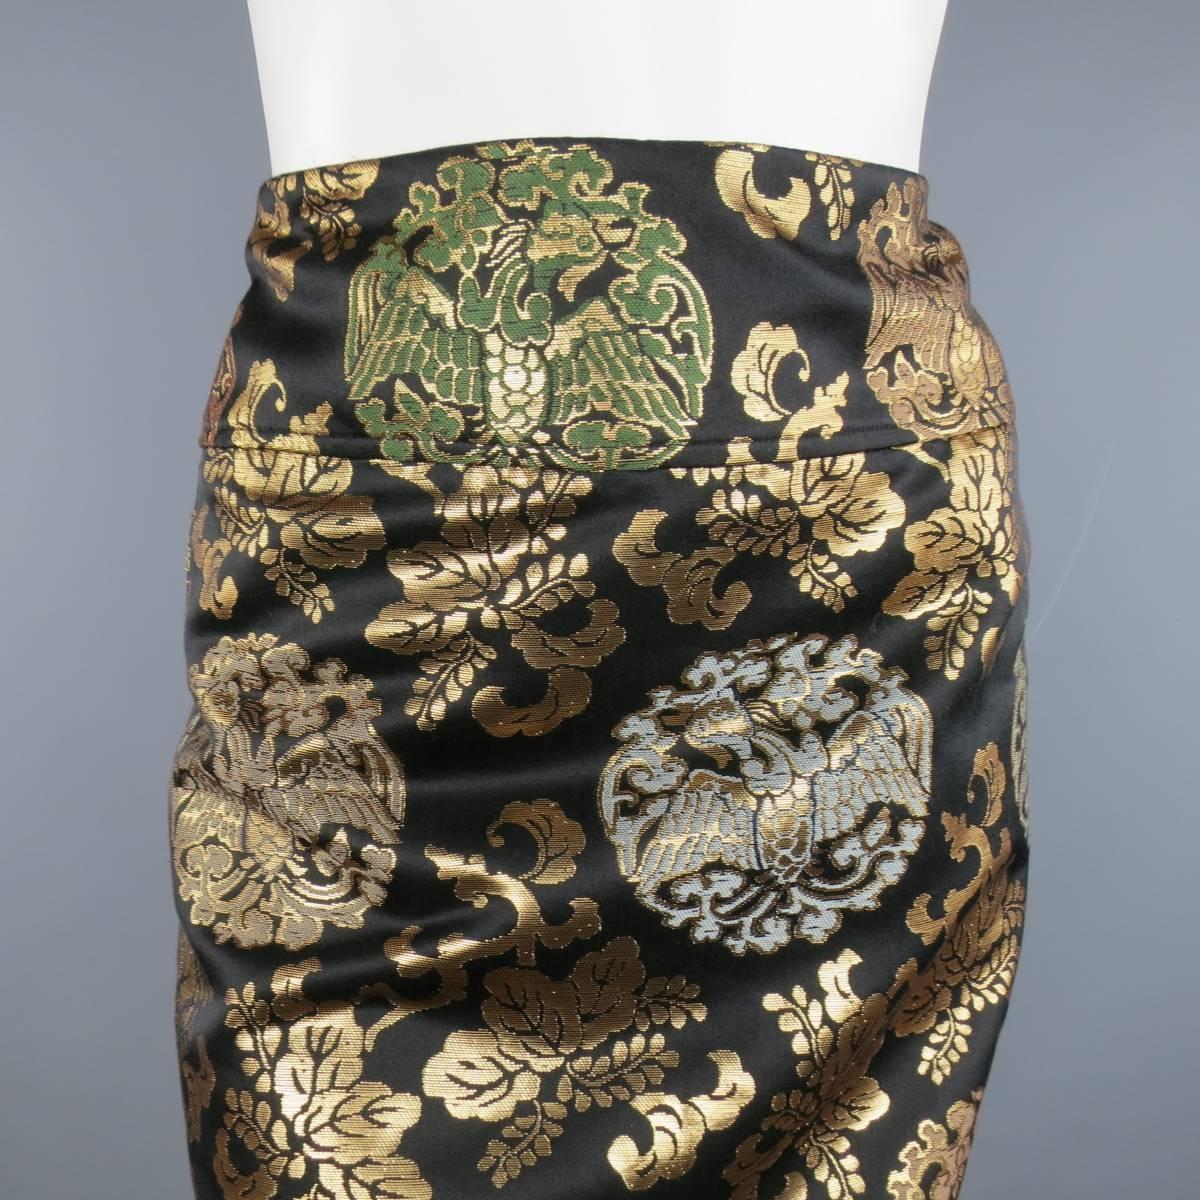 RALPH LAUREN silk, jacquard pencil skirt features a chinoiserie print in metallic gold against solid black. Skirt is fully lined with side zipper closure. Made in USA.
 
Excellent Pre-Owned Condition.
Marked: 10
 
Measurements:
 
Waste: 32 In.
Hips: